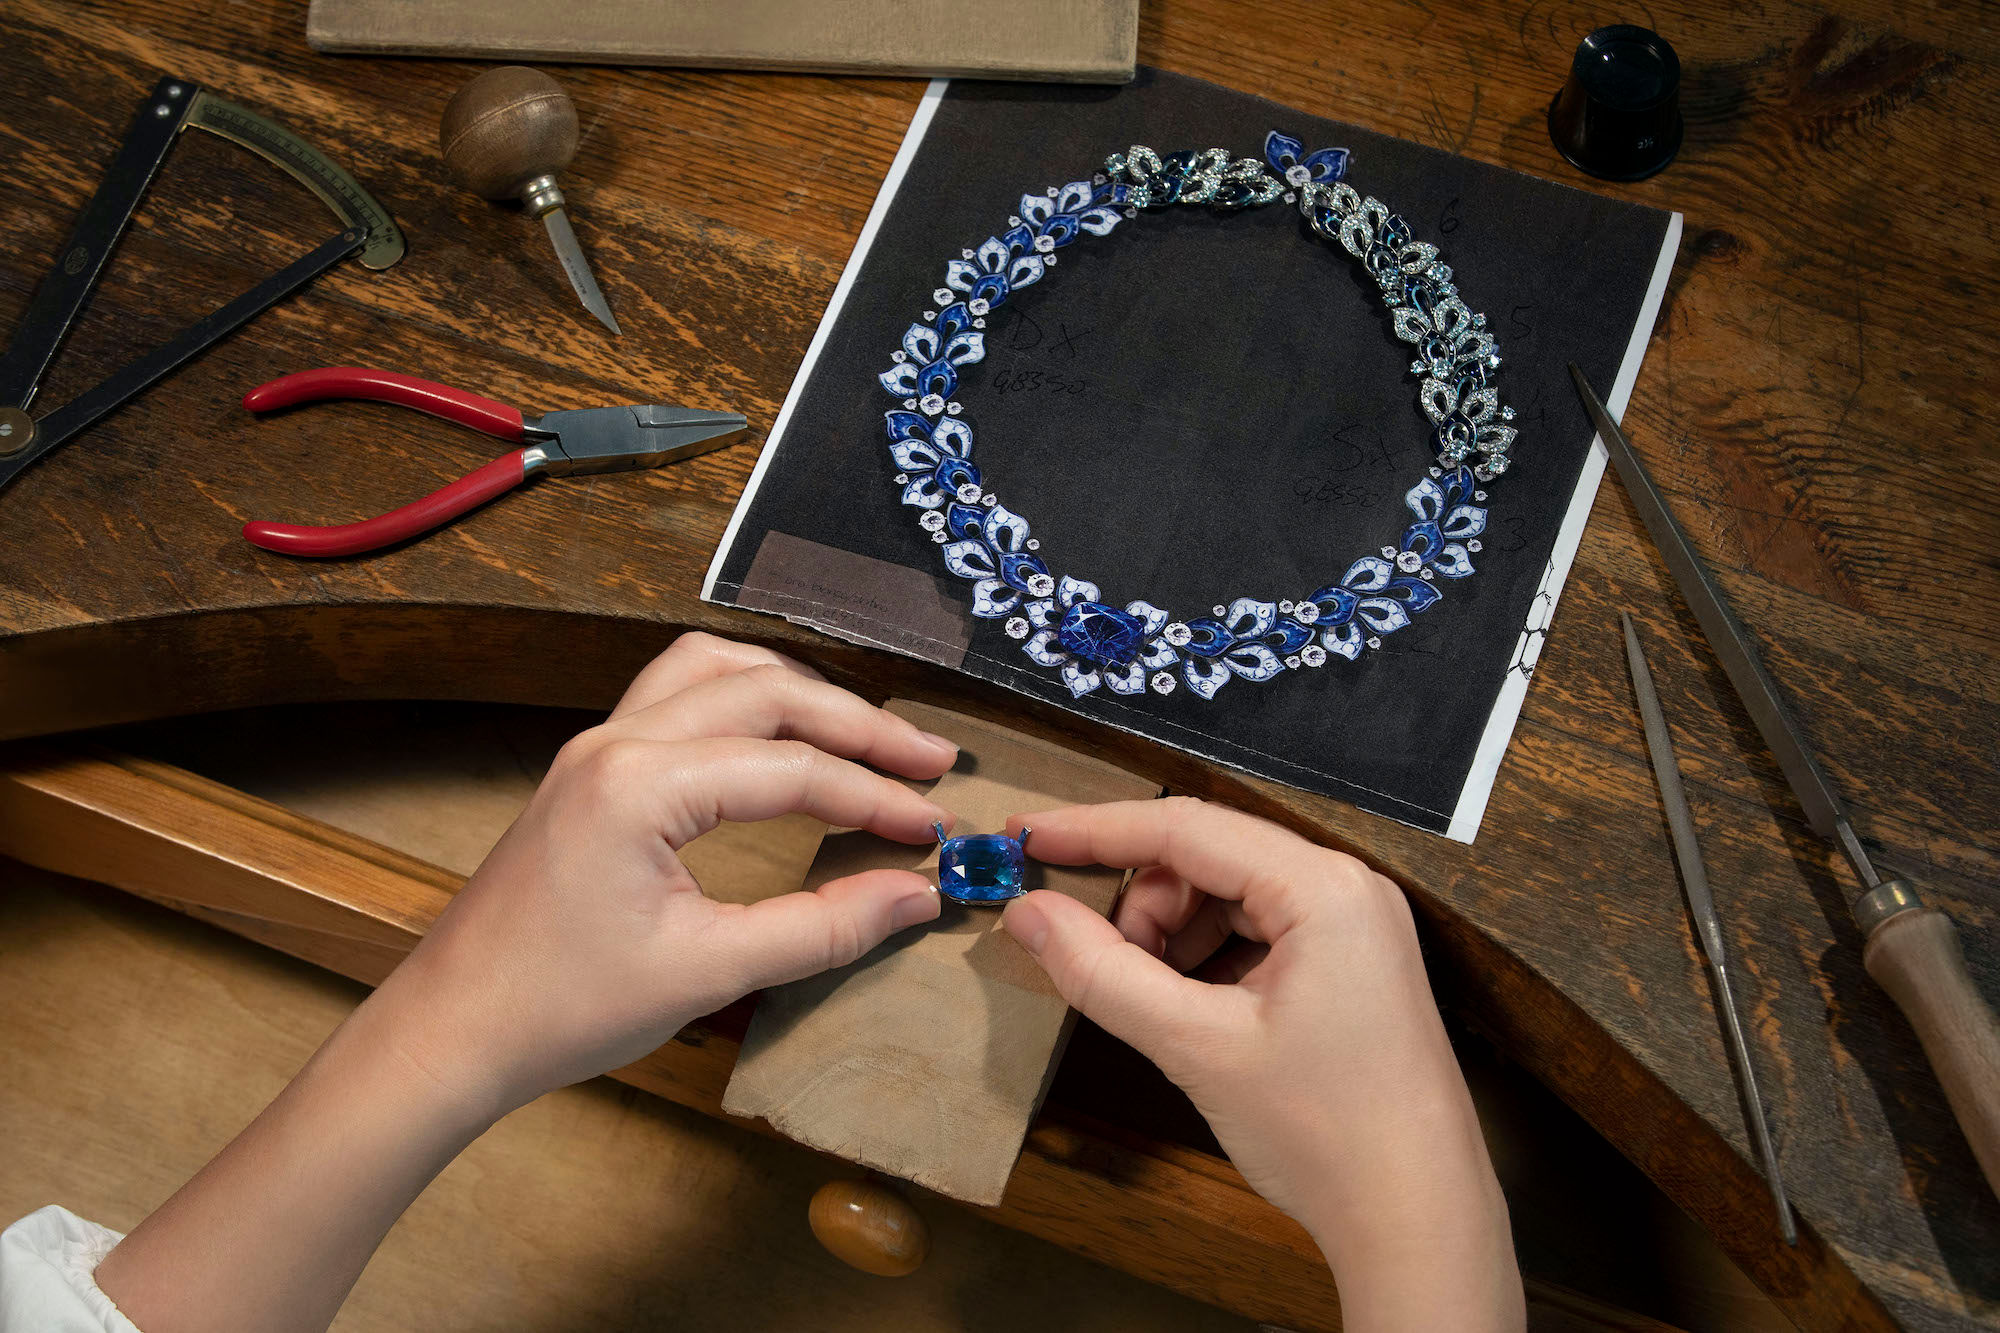 Barocko High Jewelry Necklace with Sapphires